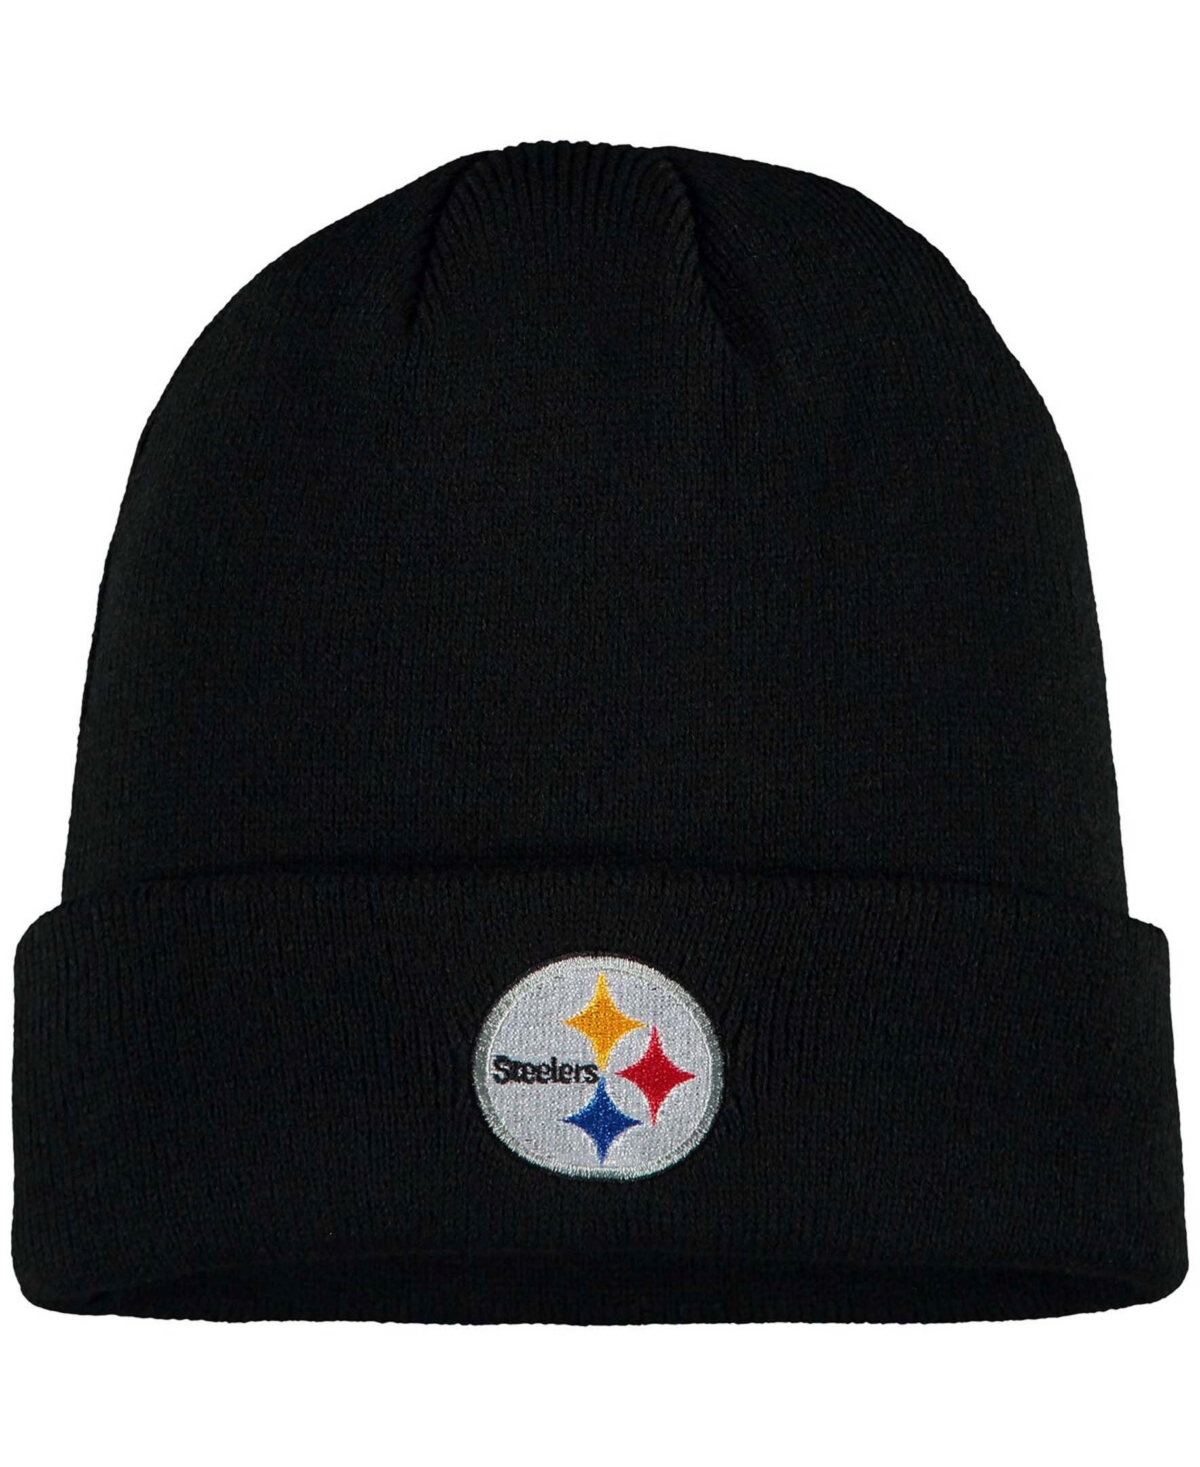 Outerstuff Kids' Big Boys And Girls Black Pittsburgh Steelers Basic Cuffed Knit Hat